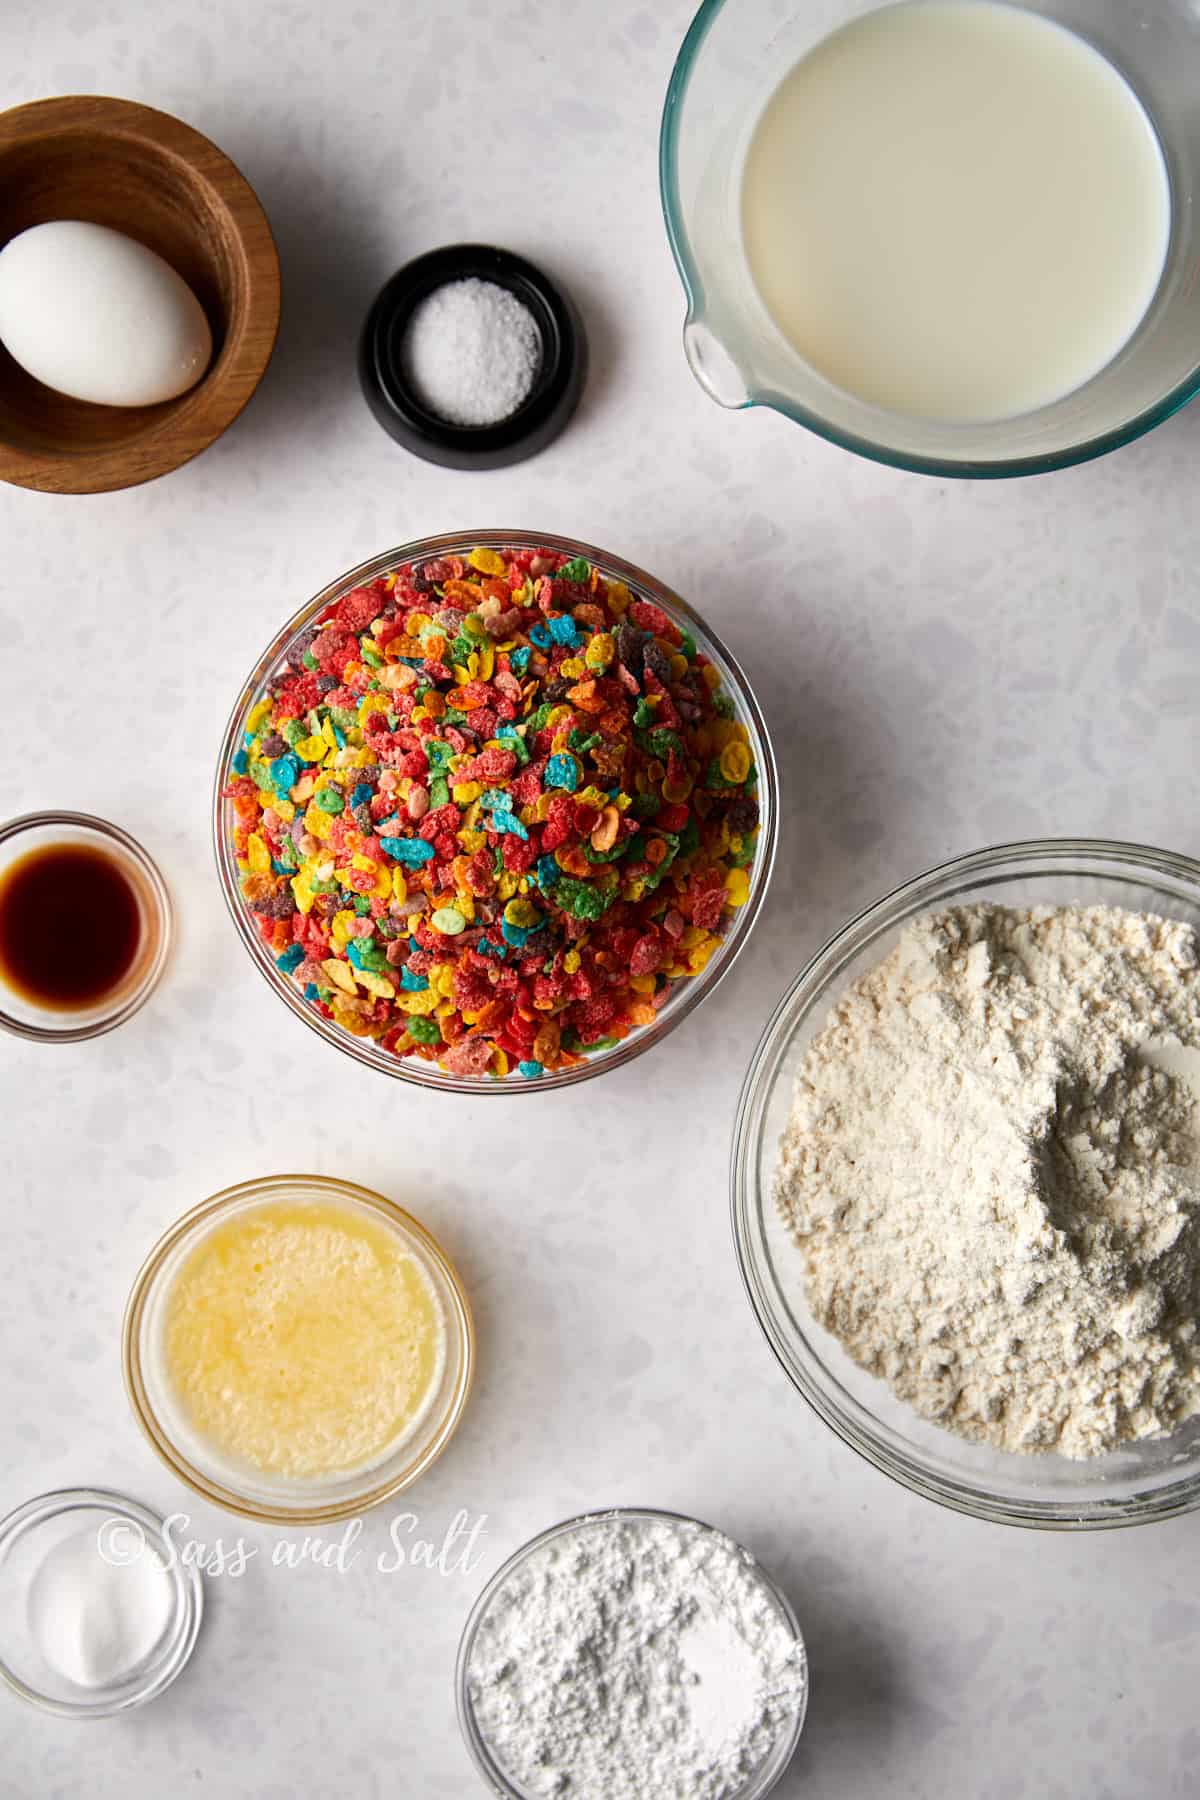 Ingredients for baking arranged on a table: Fruity Pebbles cereal in a bowl, eggs, salt, milk, vanilla extract, melted butter, flour, and confectioner's sugar, with a playful "sass and salt" watermark.